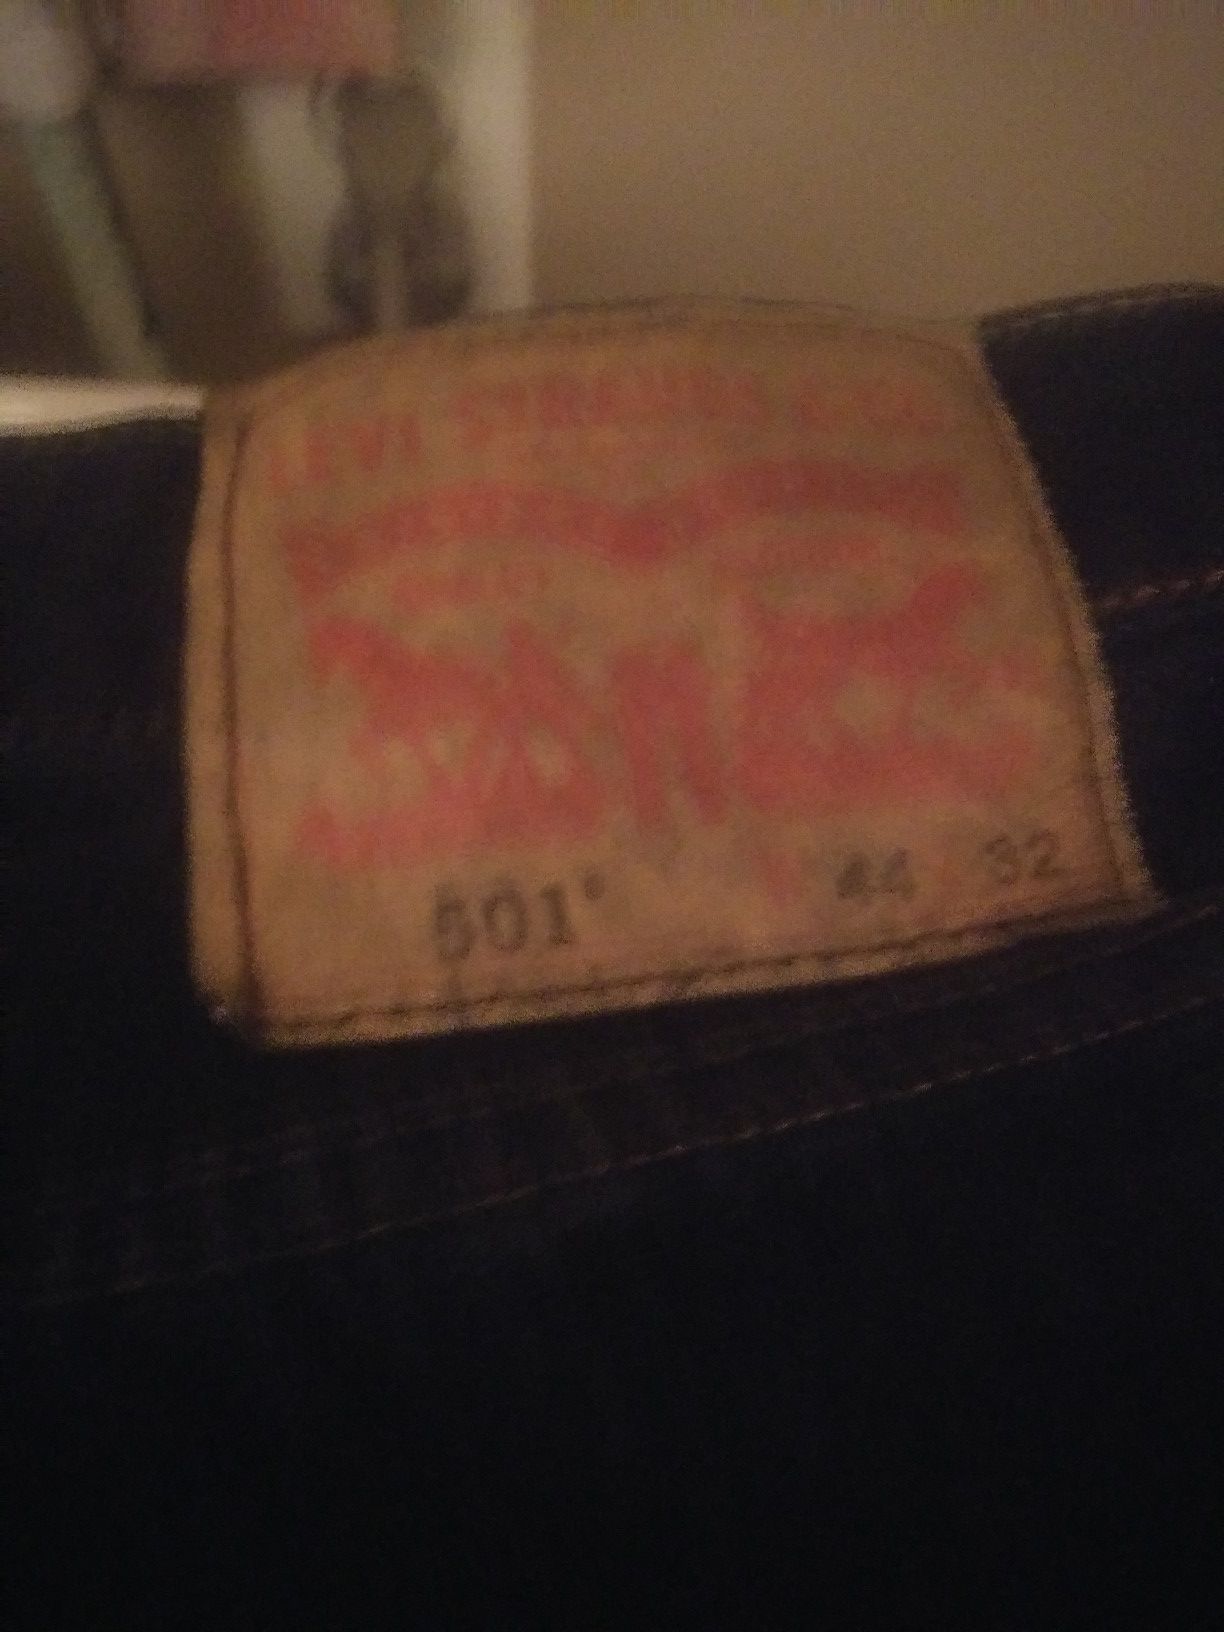 44x32 501 levis button fly dark blue used 3 times